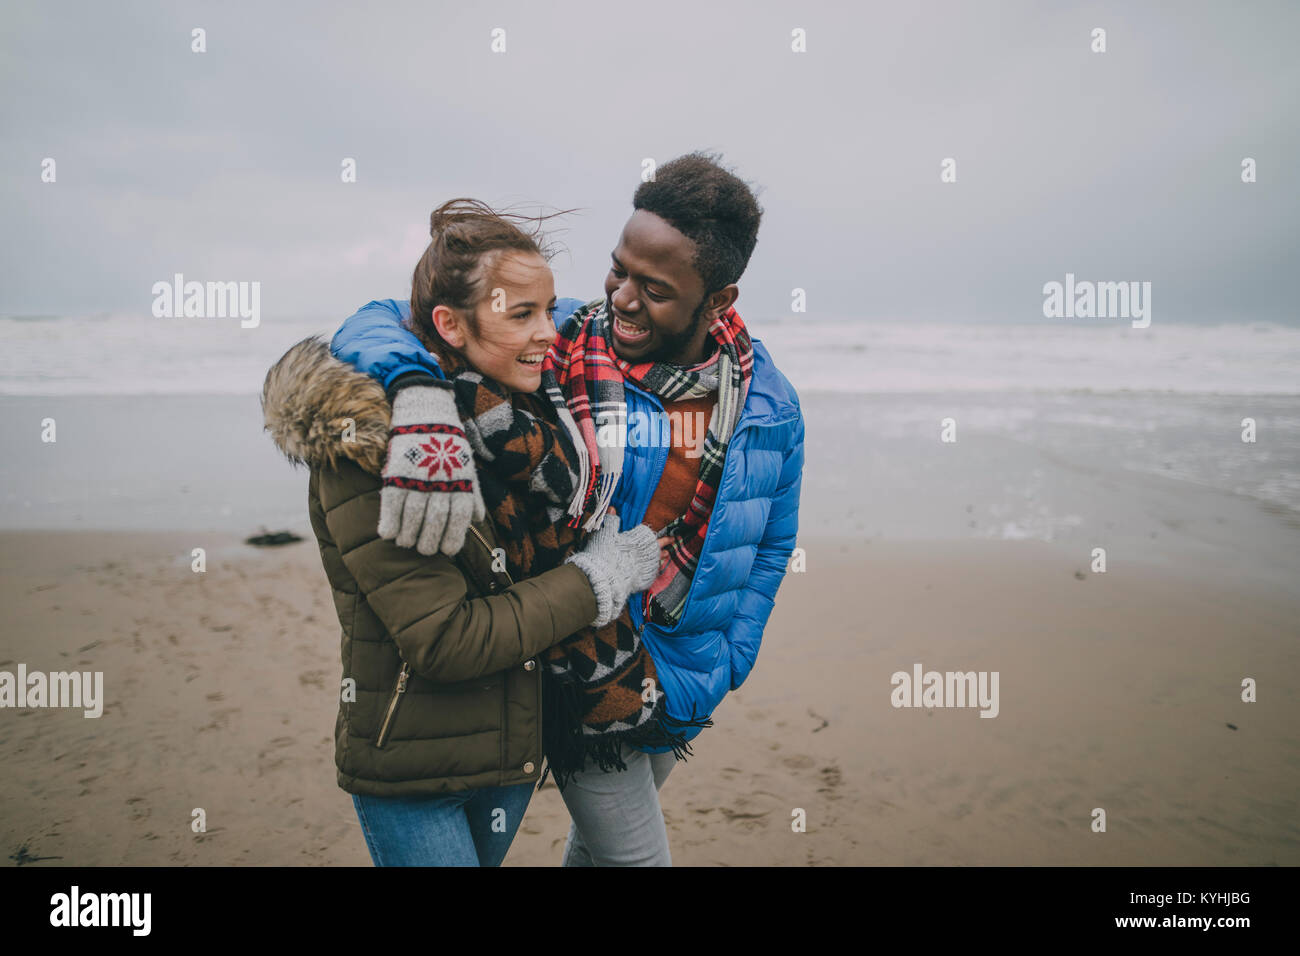 A young couple take a romantic stroll along a winter beach with their arms around each other. Stock Photo